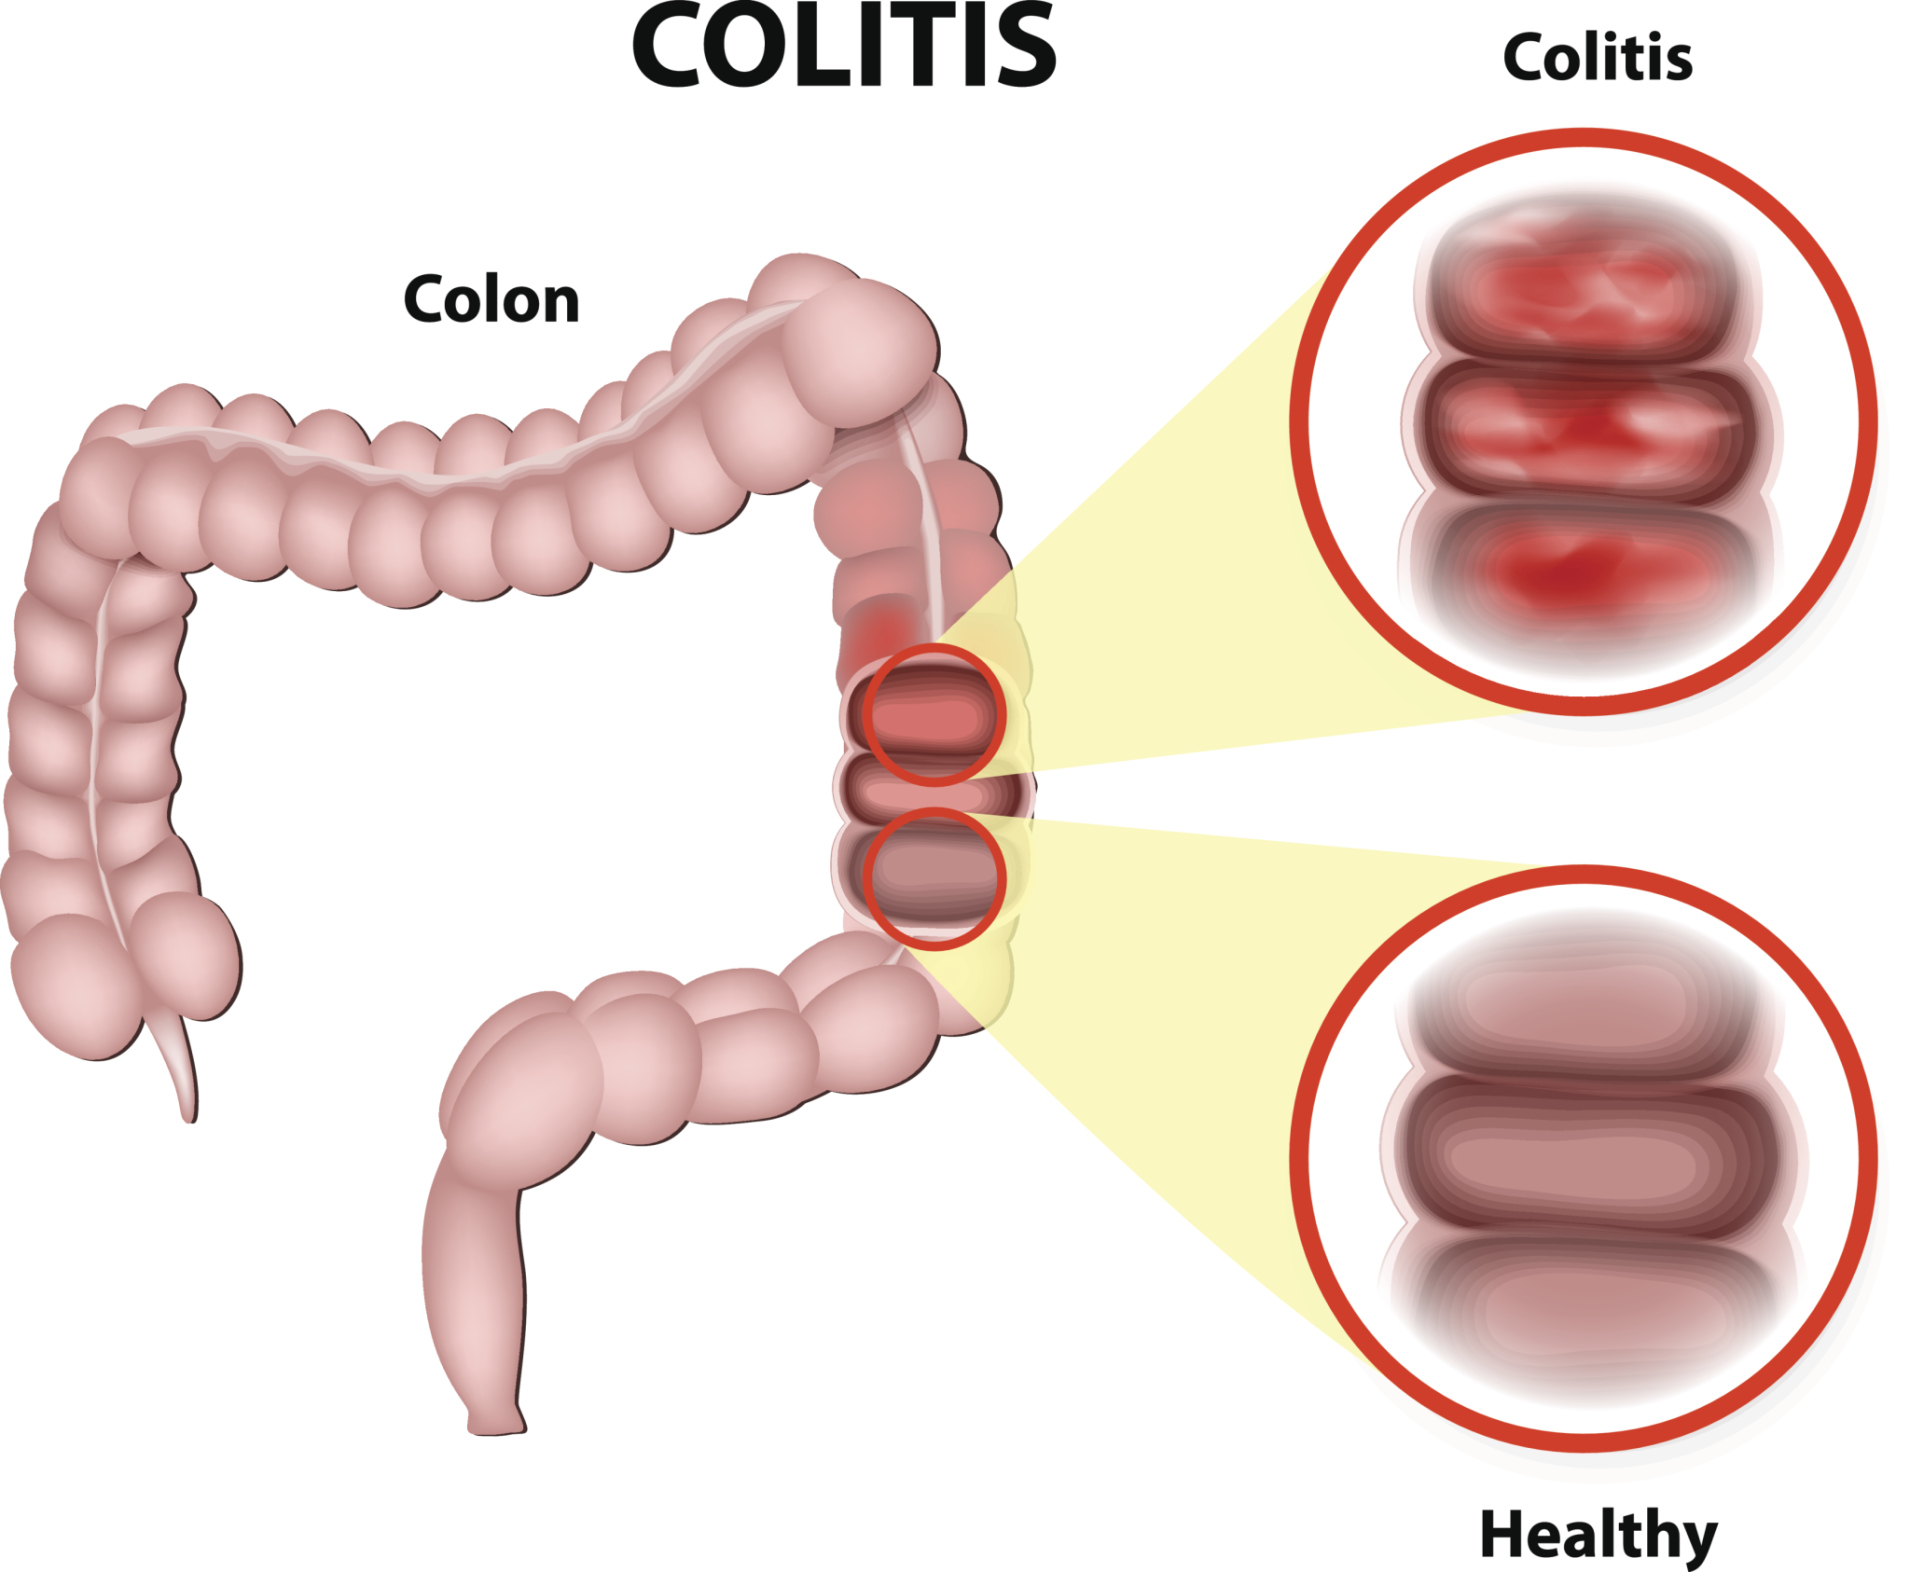 What are the treatment options for bowel inflammation?